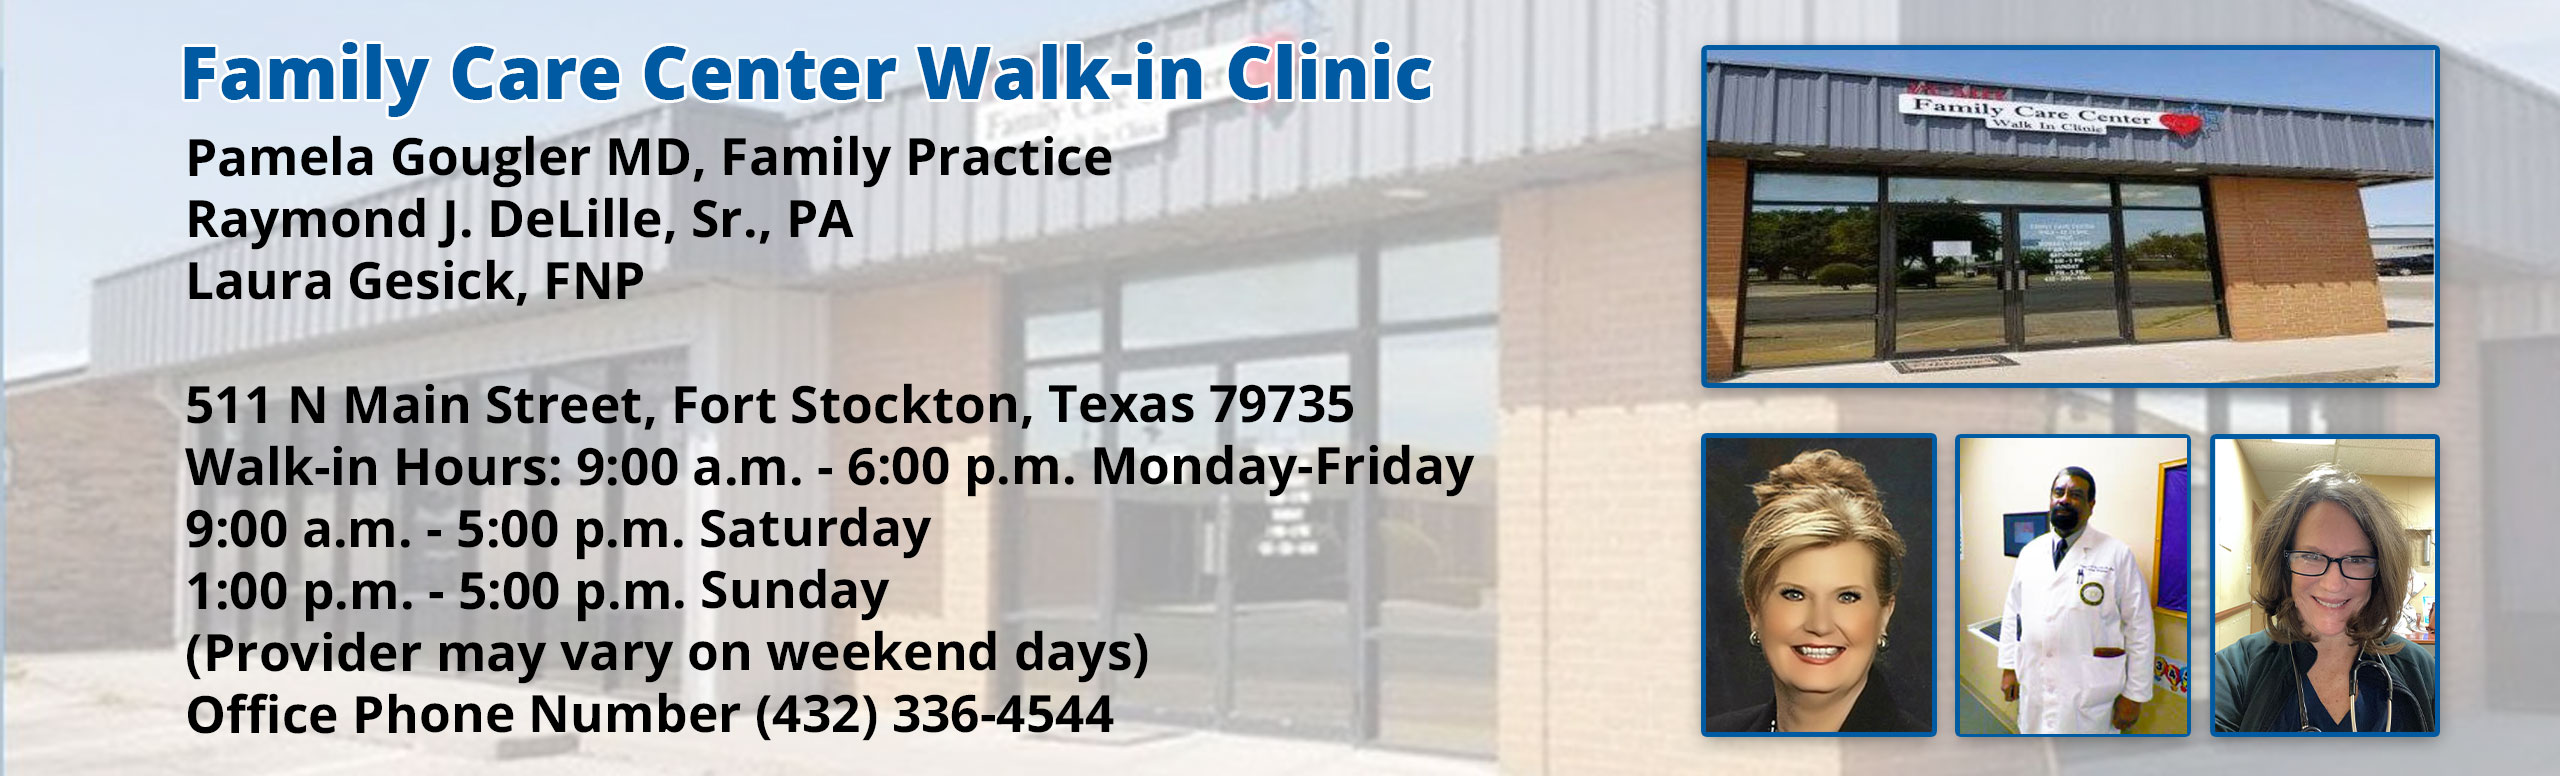 Pamela Gougler MD, Family Practice, Raymond J. DeLille, Sr., PA, Samuel Itie, FNP-C

511 N Main Street, Fort Stockton, Texas 79735
Walk-In Hours: 9:00-6:00 p.m. Monday-Friday
9:00 a.m.-5:00 p.m. Sunday
(Provider may vary on weekend days)
Office Phone Number (432) 336-4544